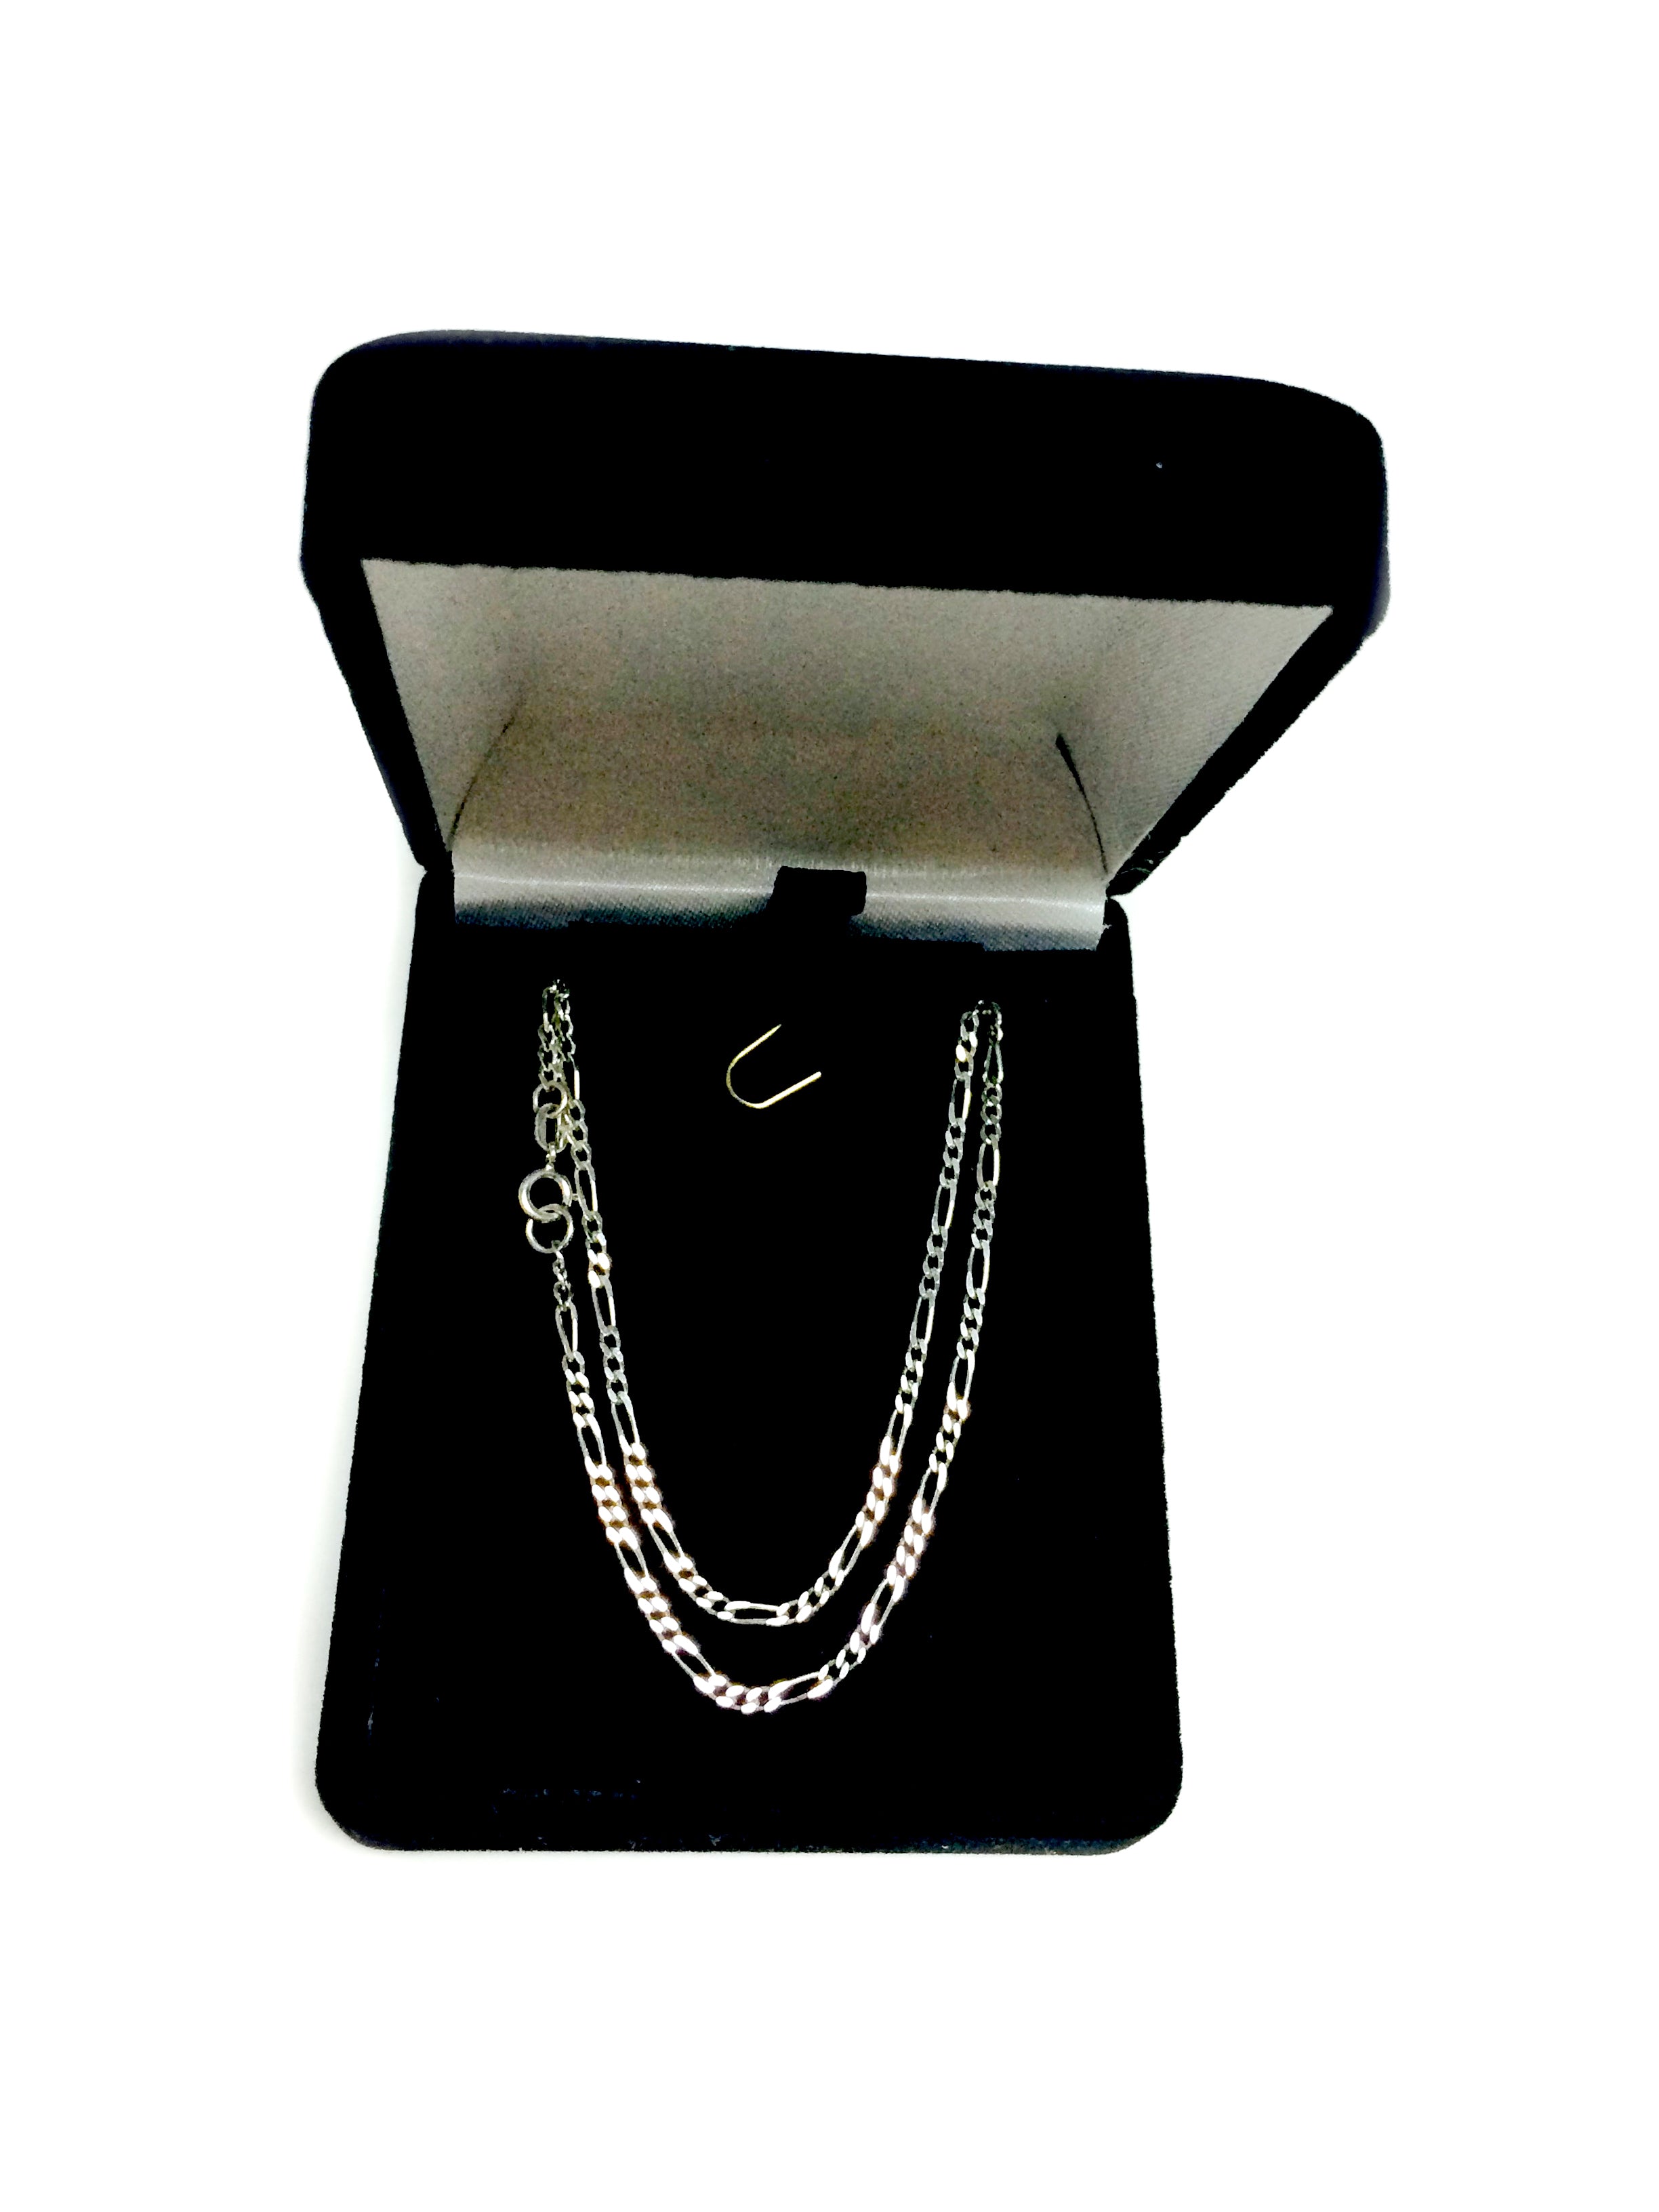 14k White Solid Gold Figaro Chain Necklace, 1.9mm fine designer jewelry for men and women